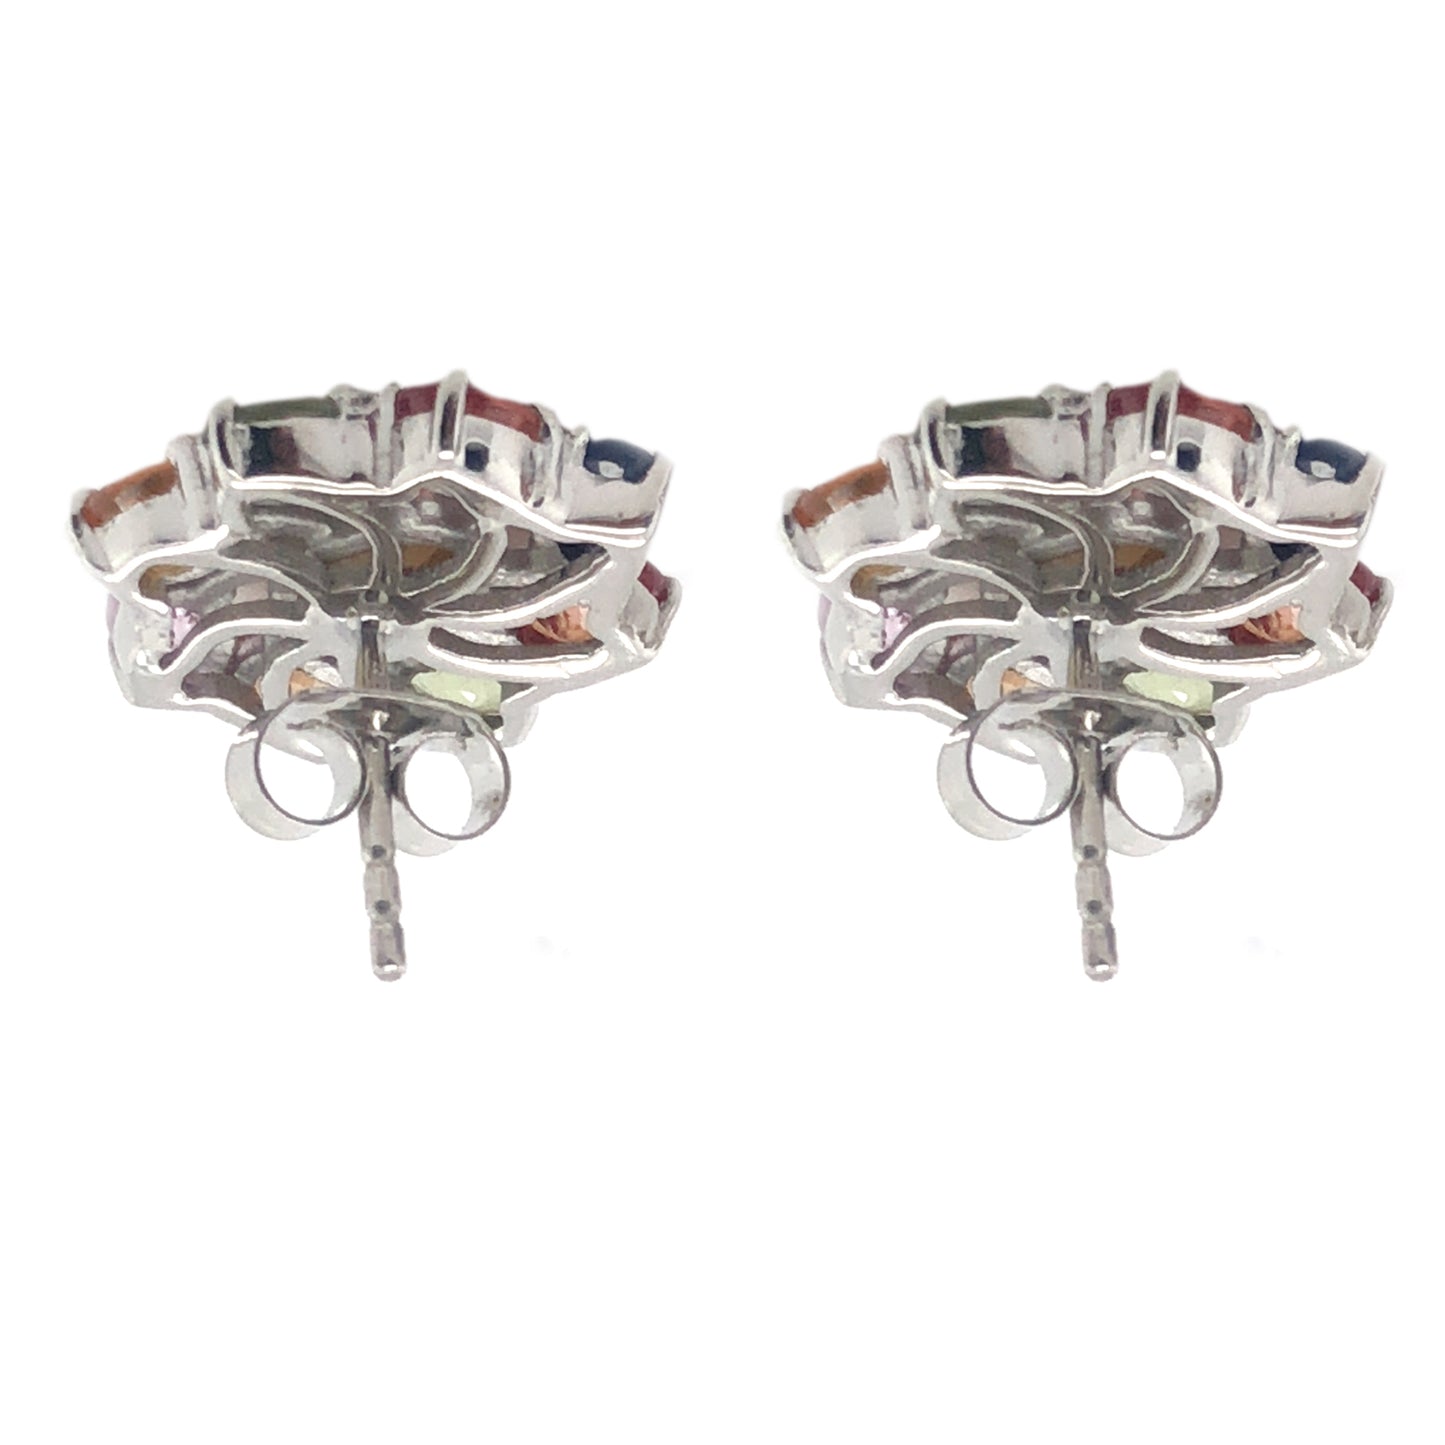 925 Sterling Silver Citrine With Multi Sapphire Earrings